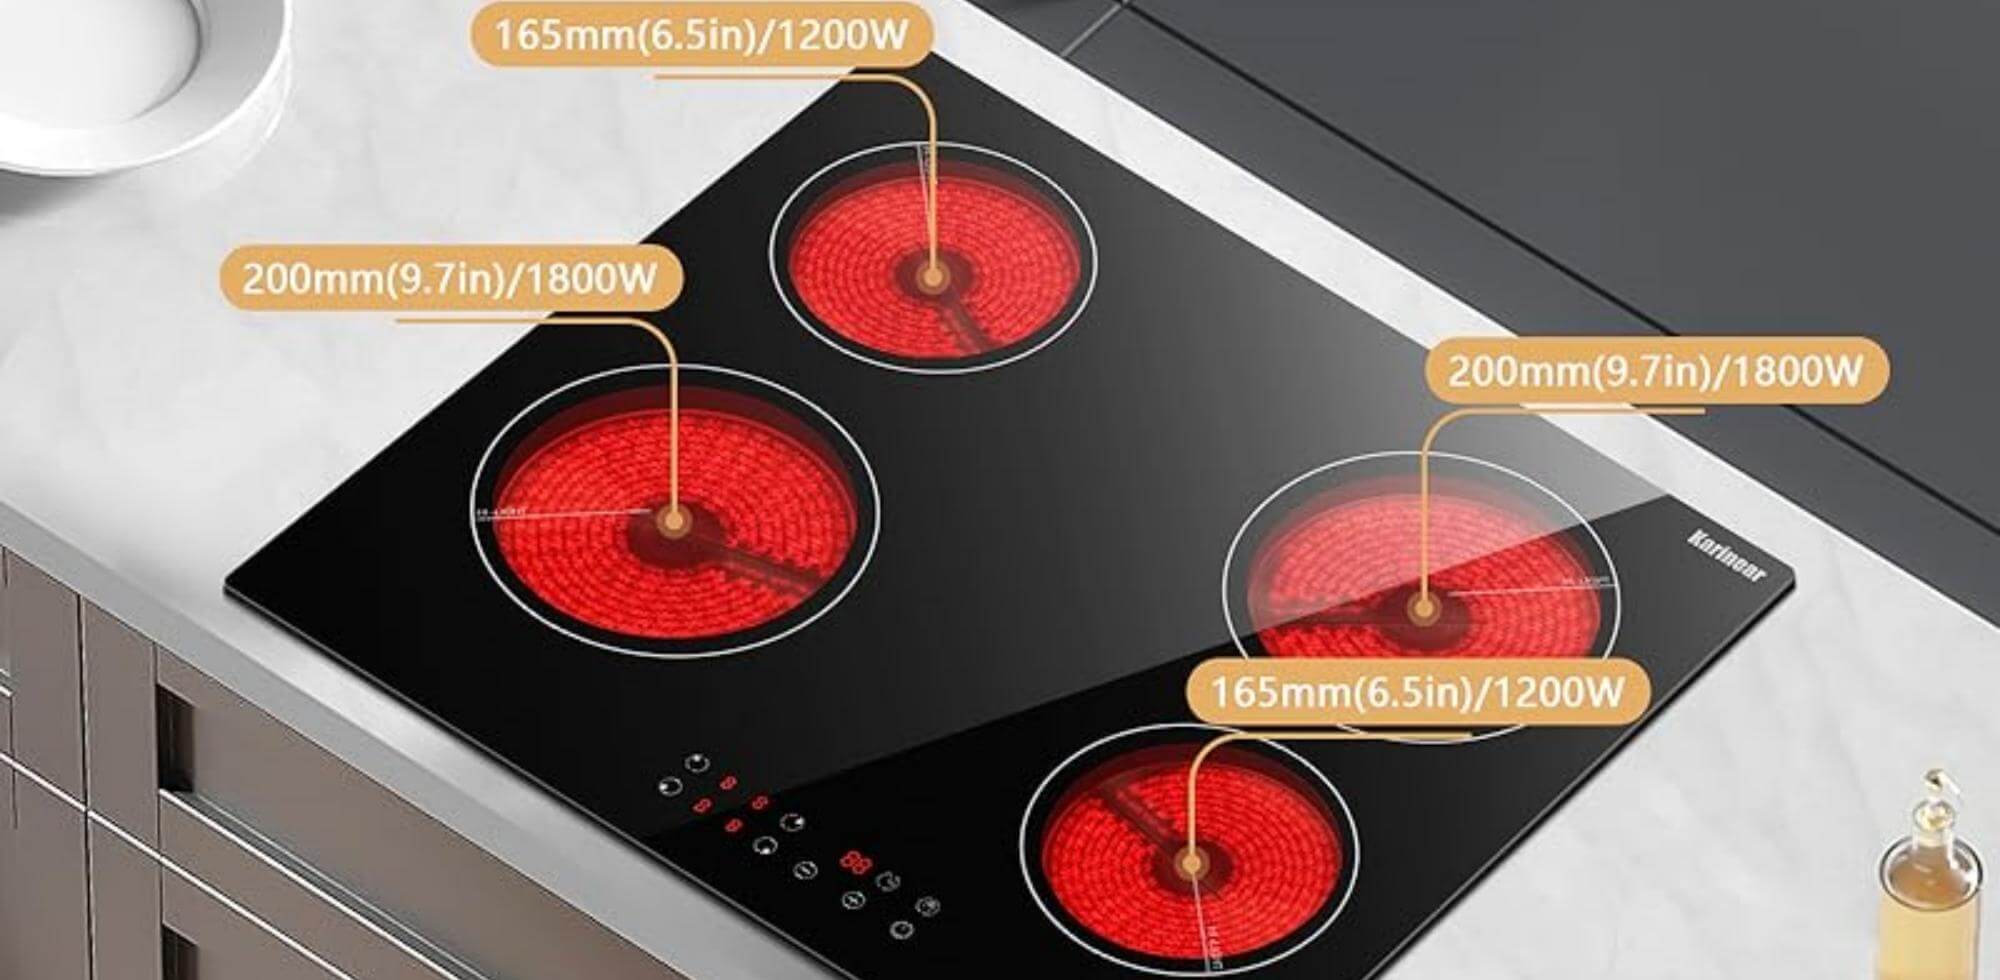 Karinear Electric Cooktop 24 Inch, 4 Burners Built-in Electric StoveTop  with Wooden Patterned Surface, Ceramic Cooktop with Child Lock, Timer,  Residual Heat Indicator, 220-240v Hard Wired, Wiring Required(LH06)